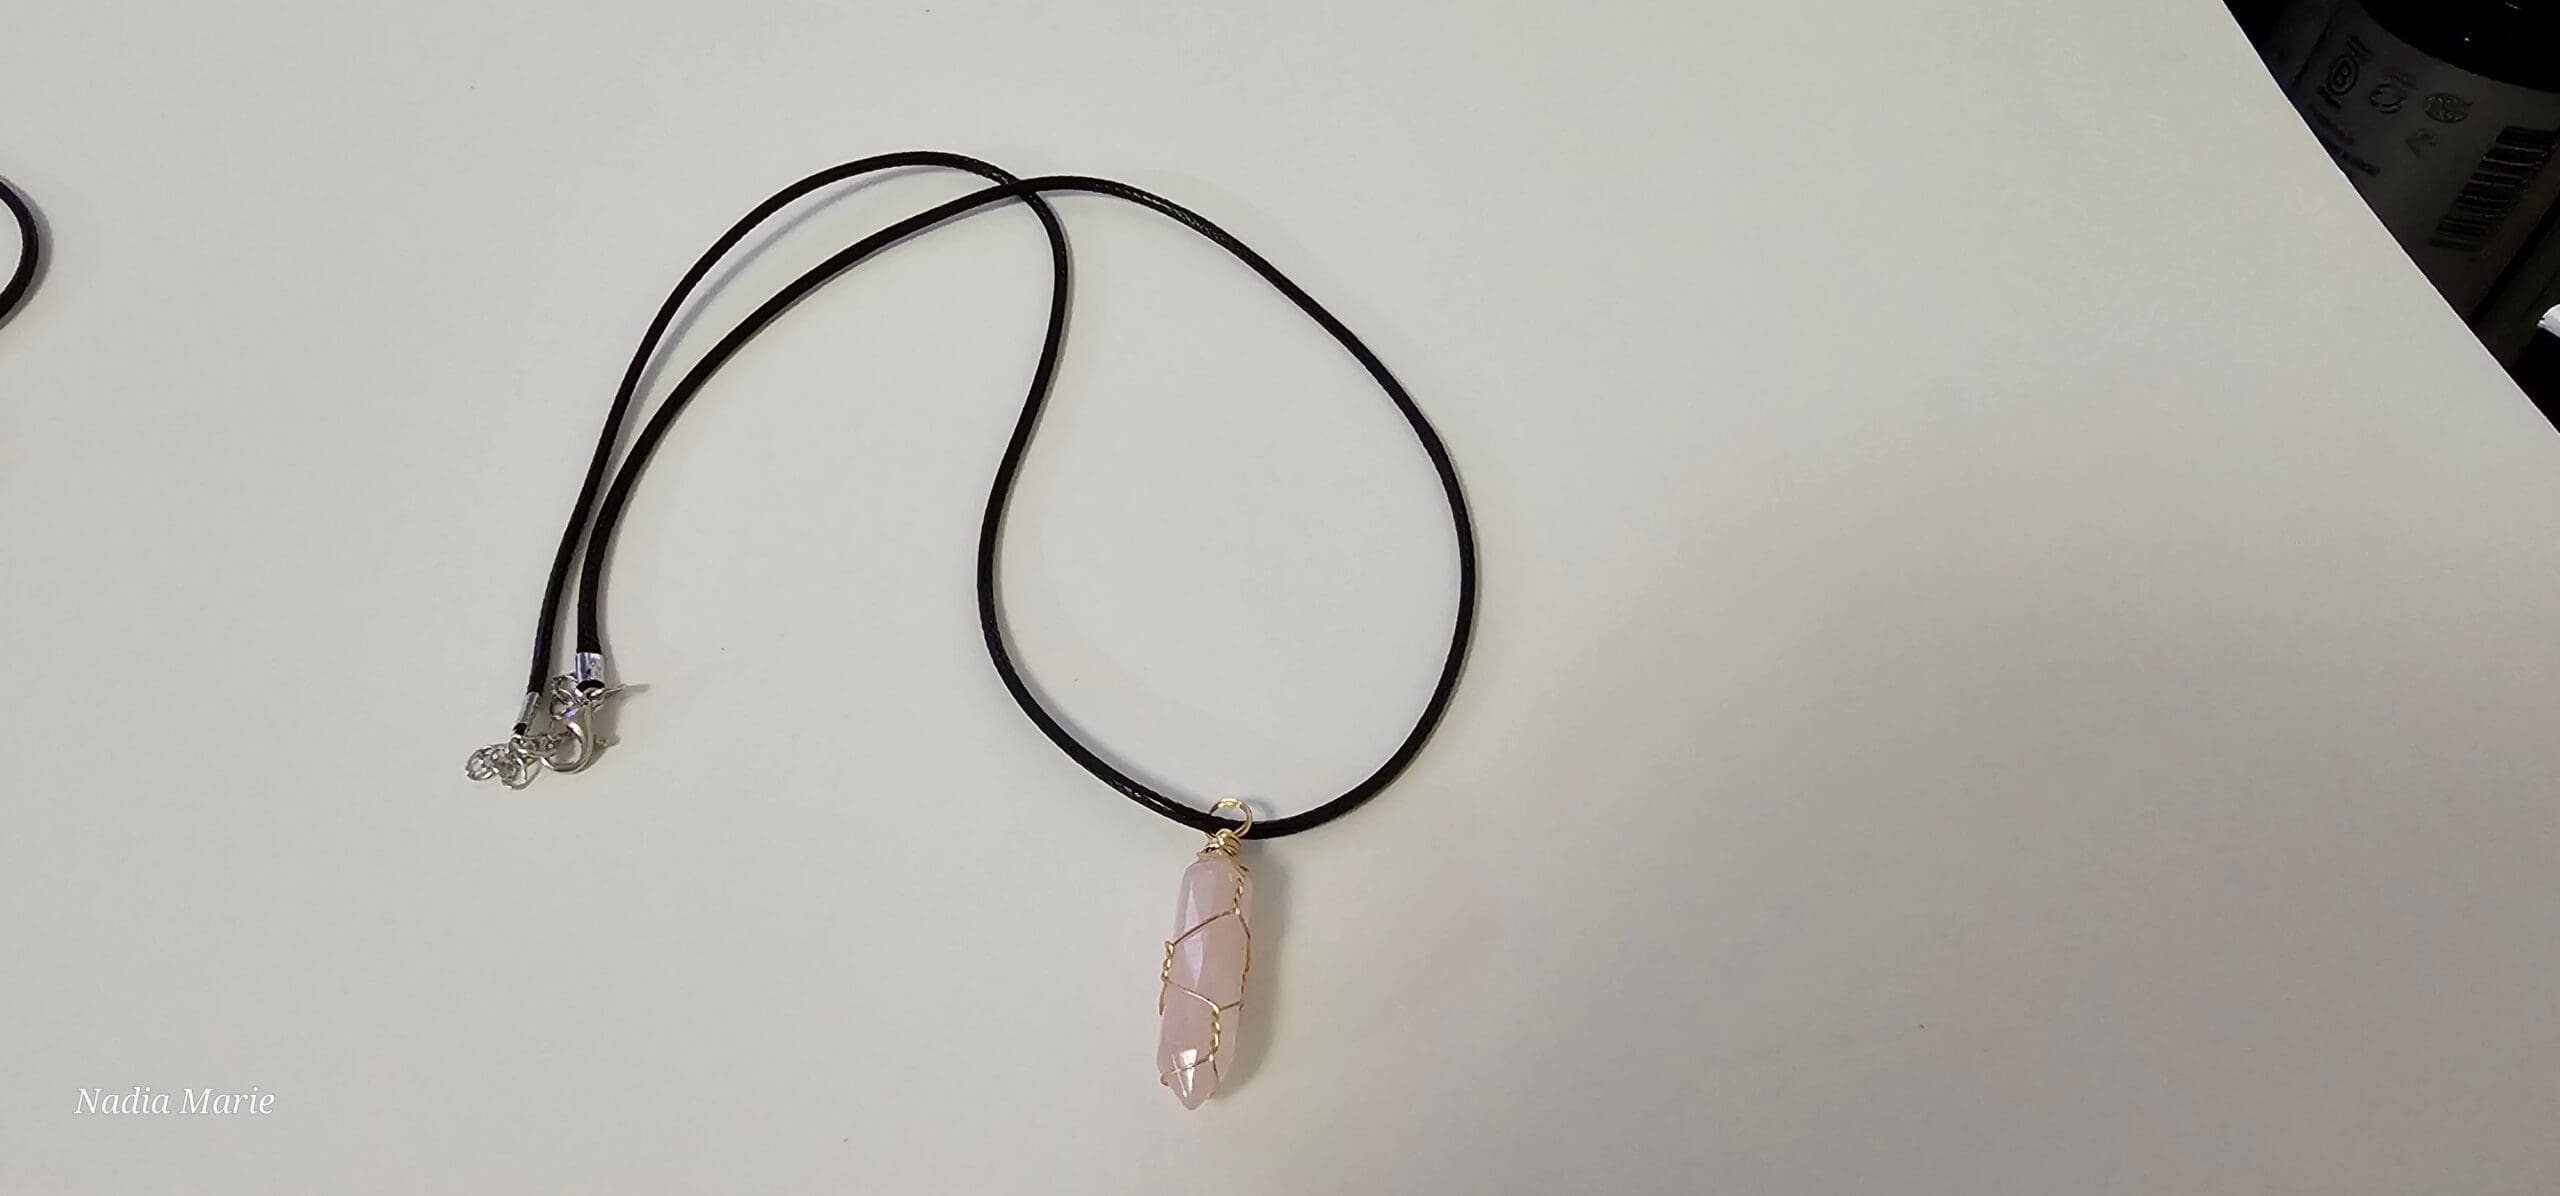 WIN a Crystal Necklace